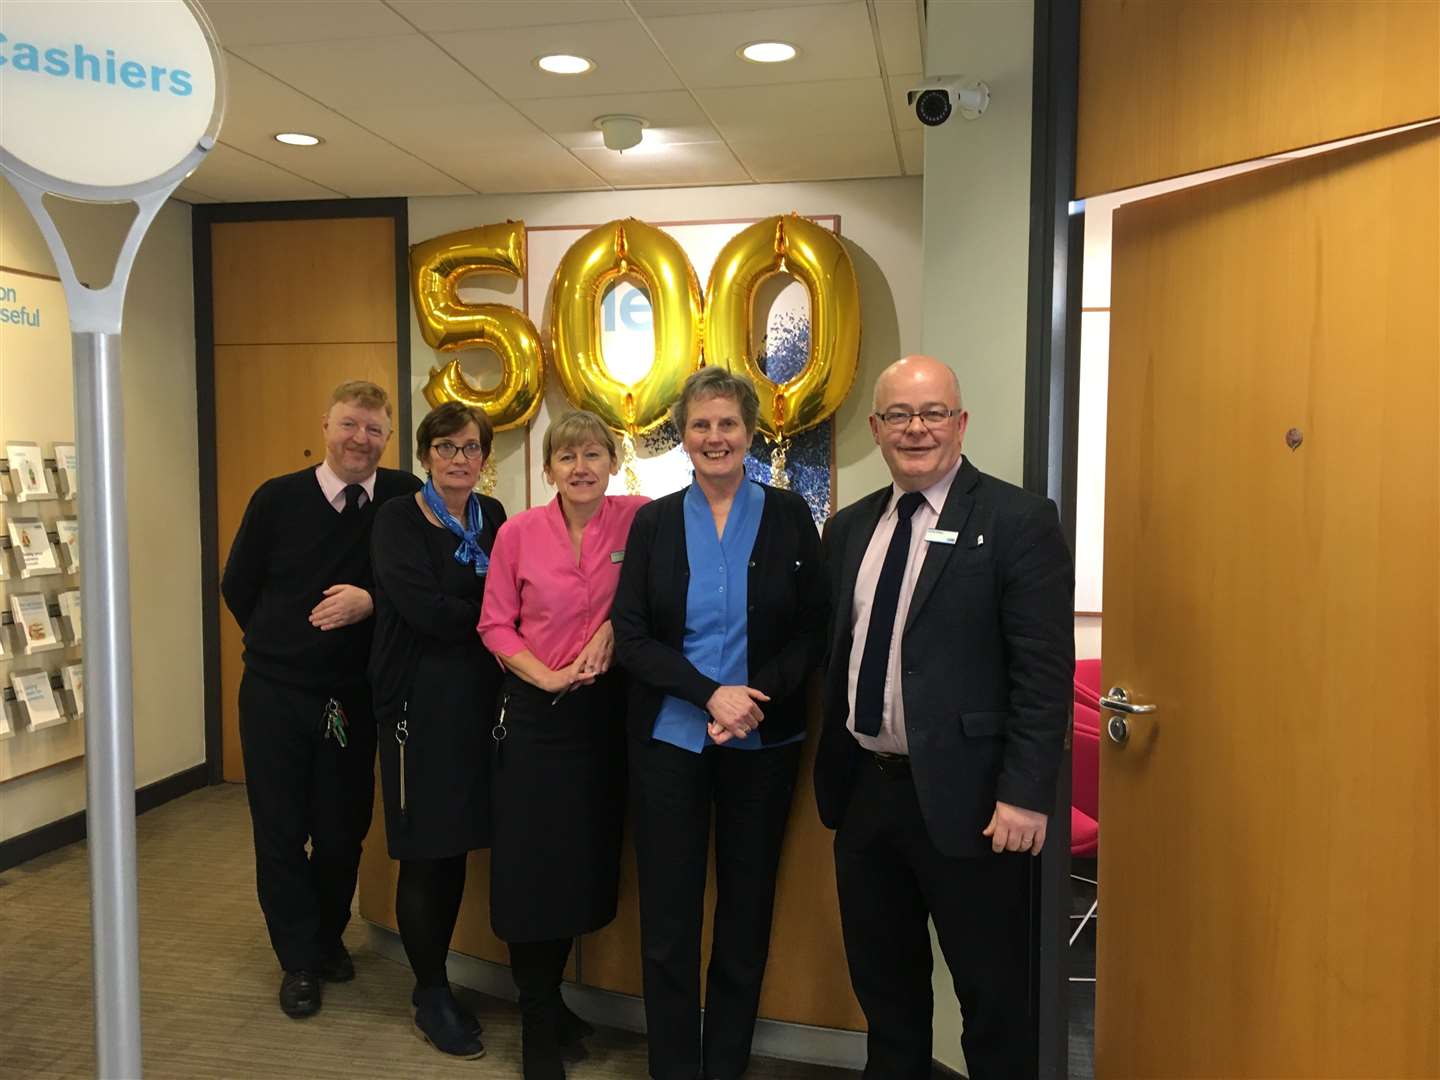 Waiting to welcome visitors to the mortgage open day are Buckie TSB staff members (from left) Iain Davidson, Rhonda McIntosh, Fiona Herd, Catherine Cowie and branch manager David Ettles.